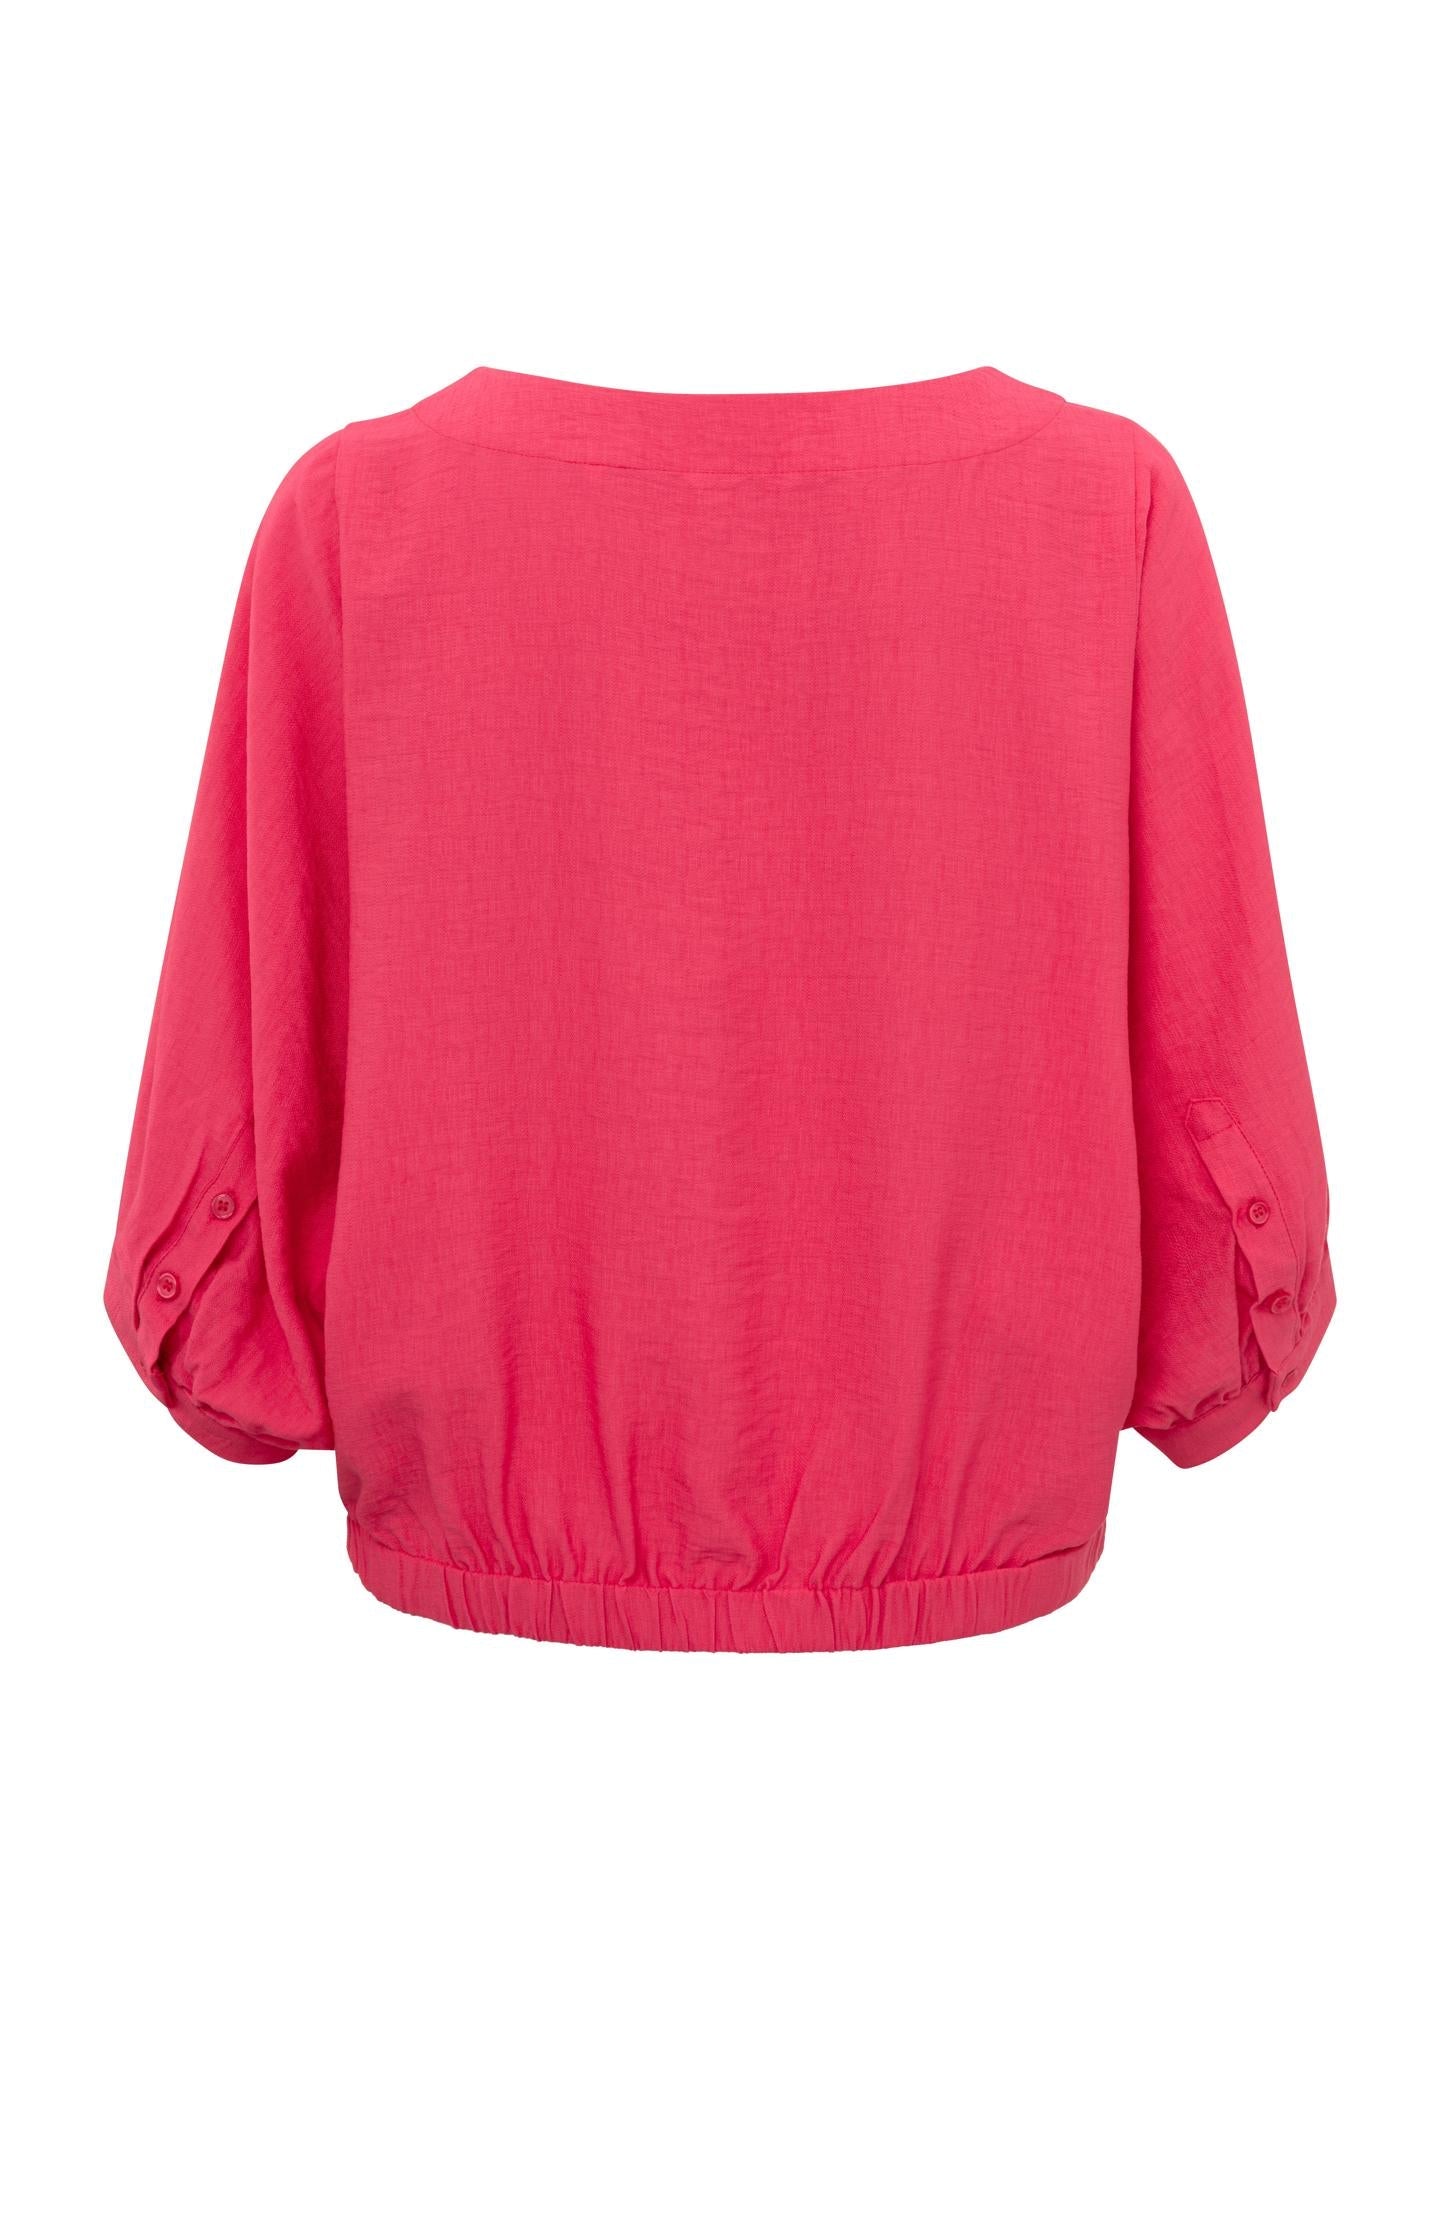 Batwing top with boatneck and long sleeves in wide fit